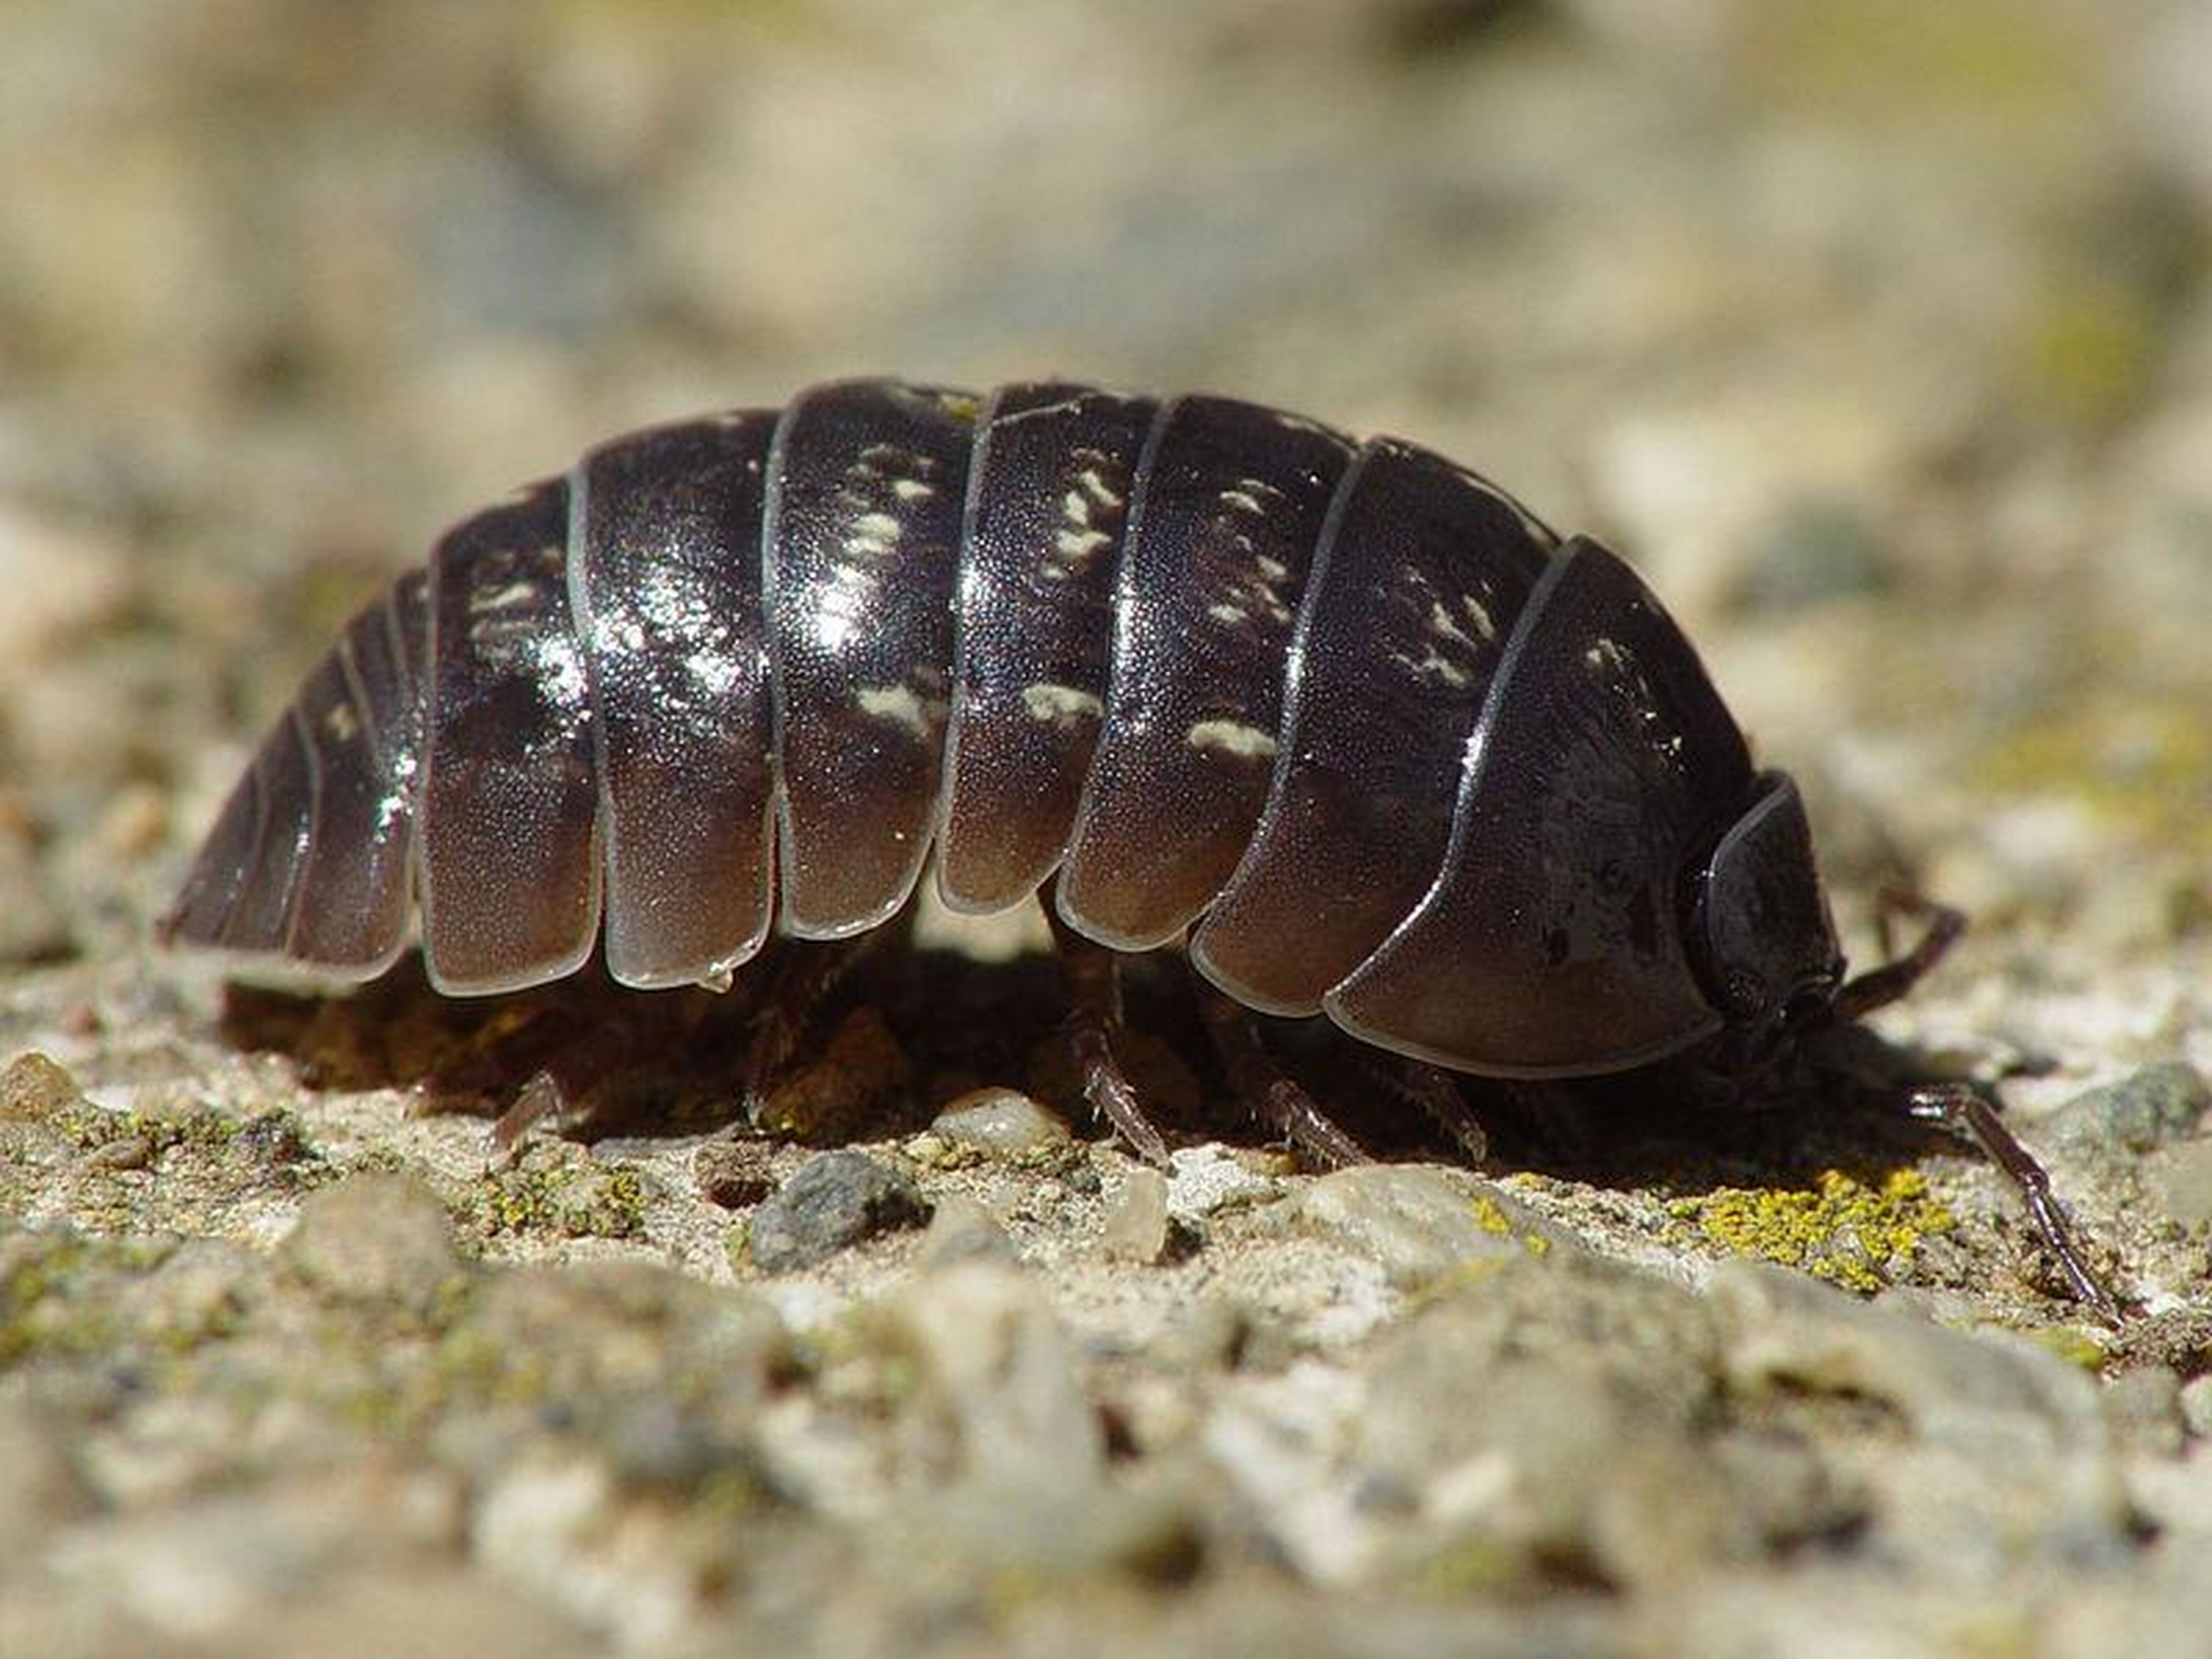 Pill bugs become unwilling hosts to an intestinal parasite.